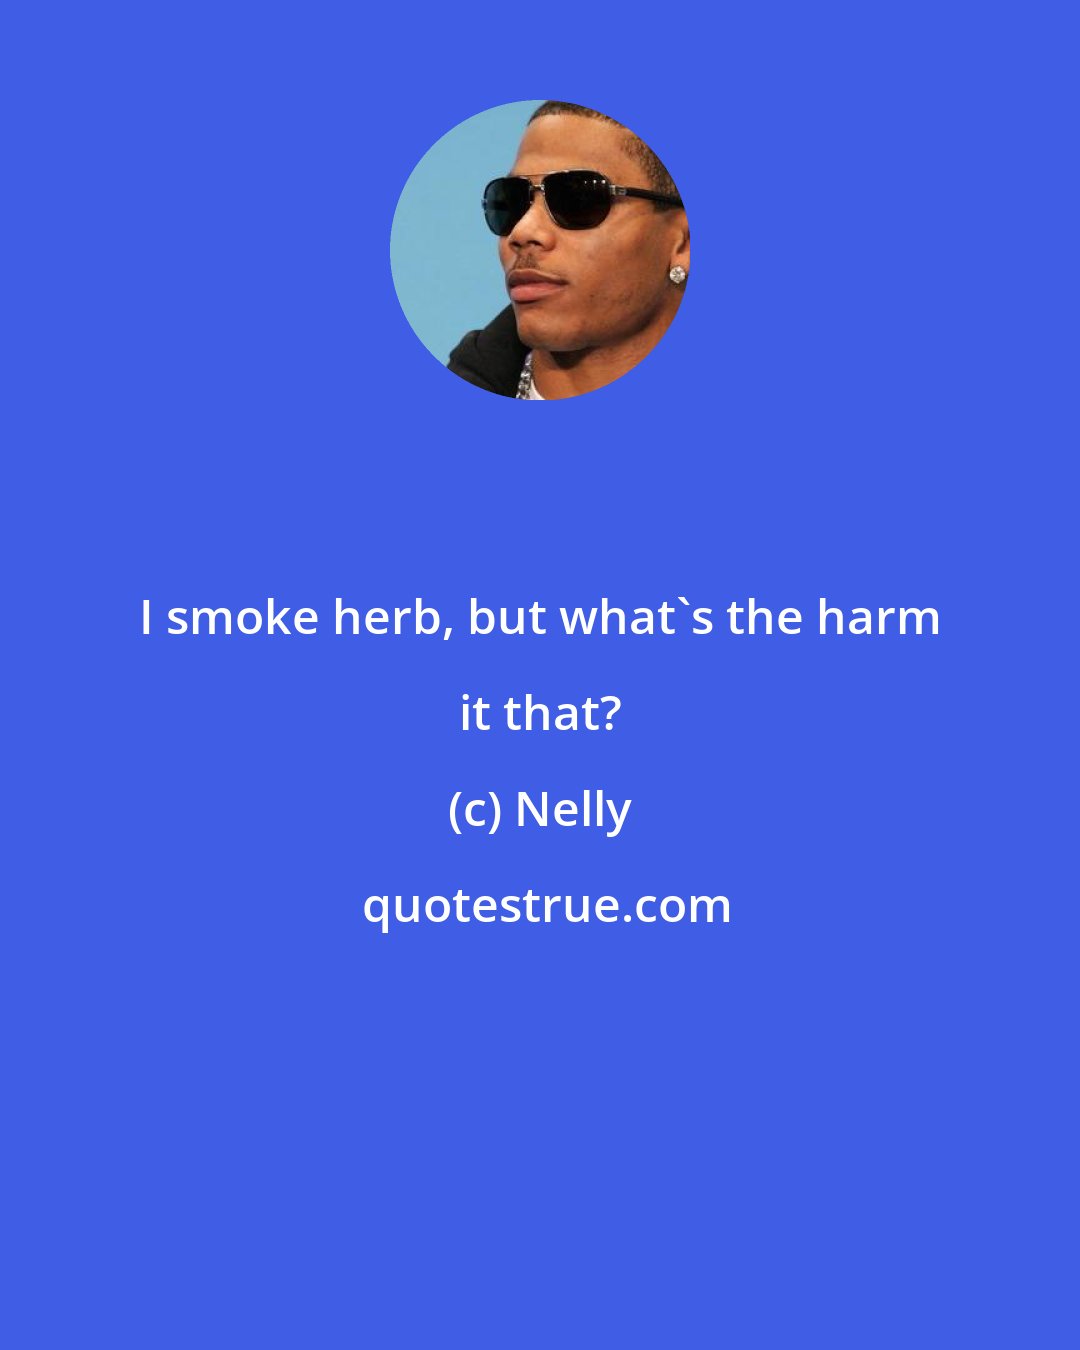 Nelly: I smoke herb, but what's the harm it that?